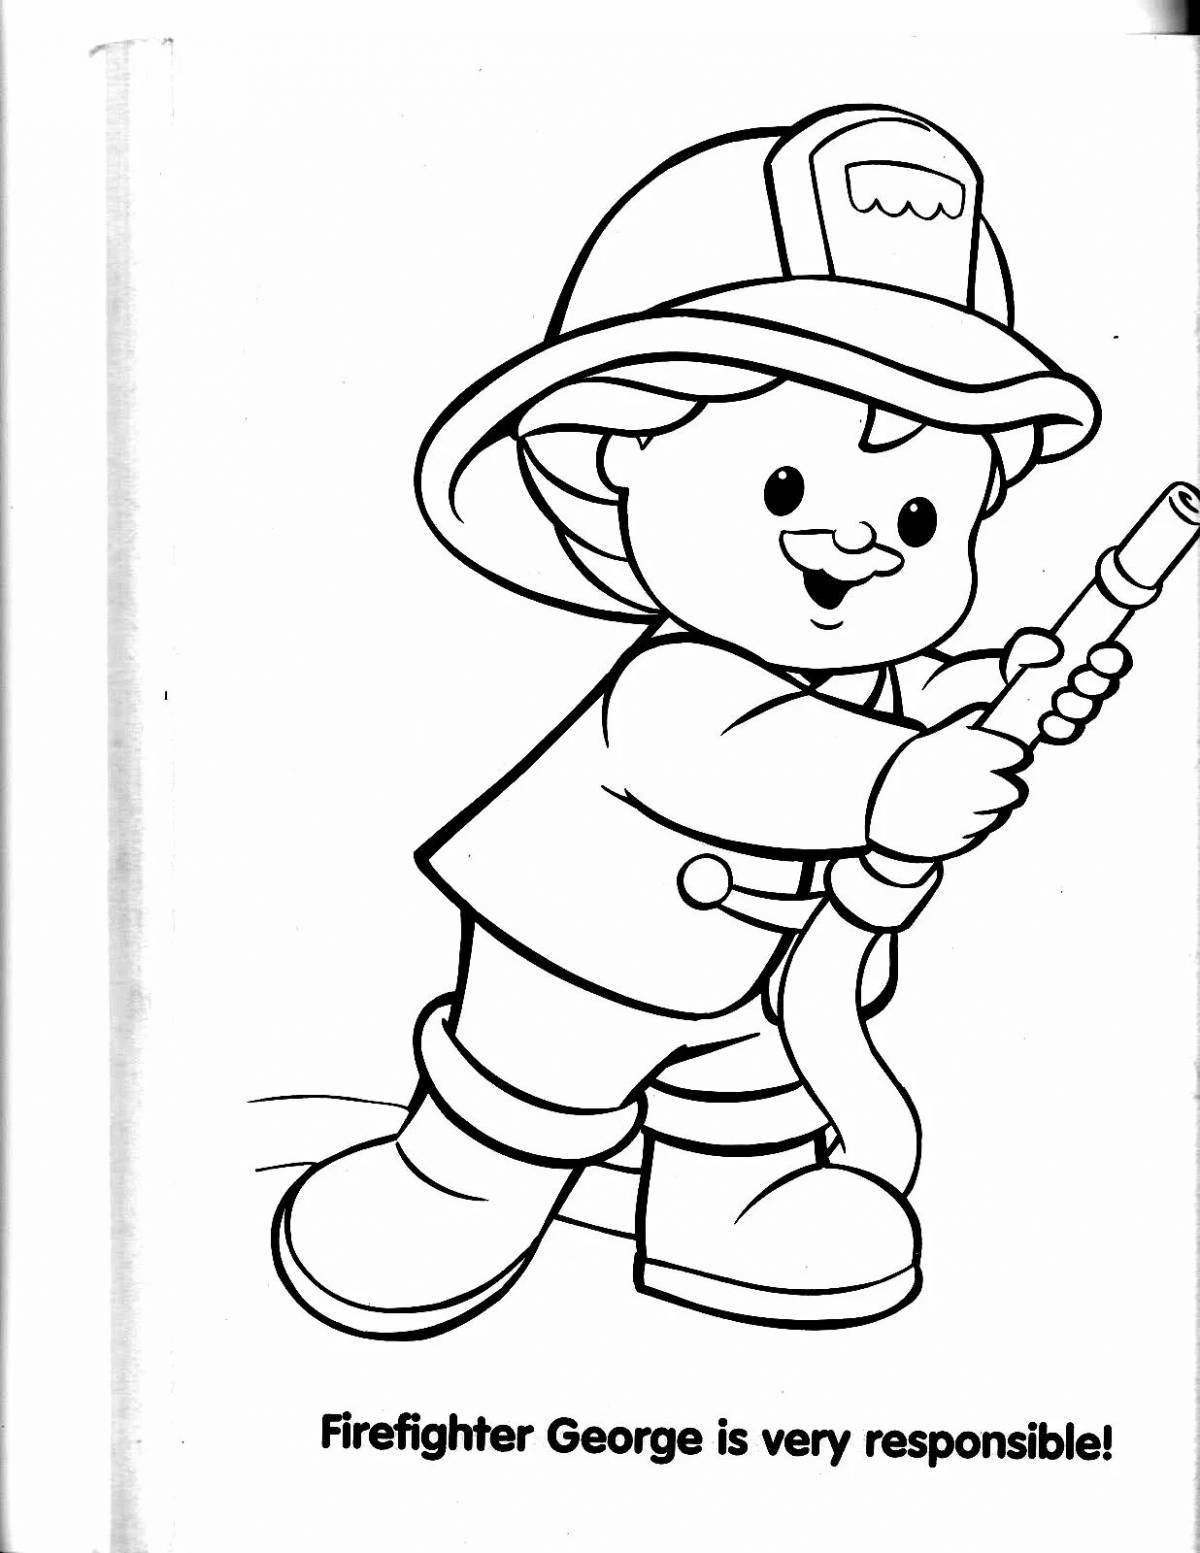 Amazing fireman coloring pages for kids